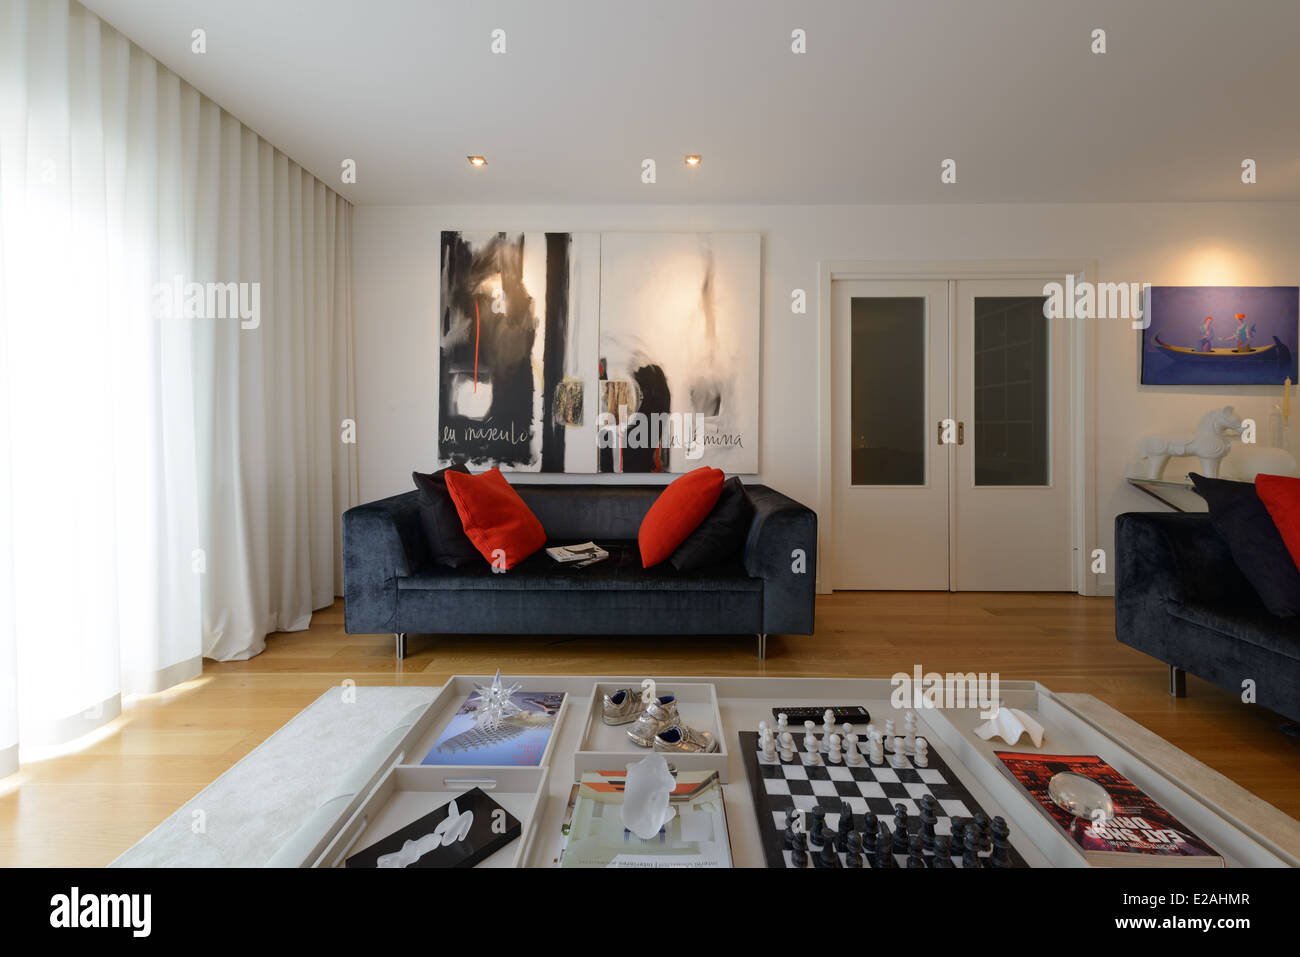 Living room with modern interior design Stock Photo